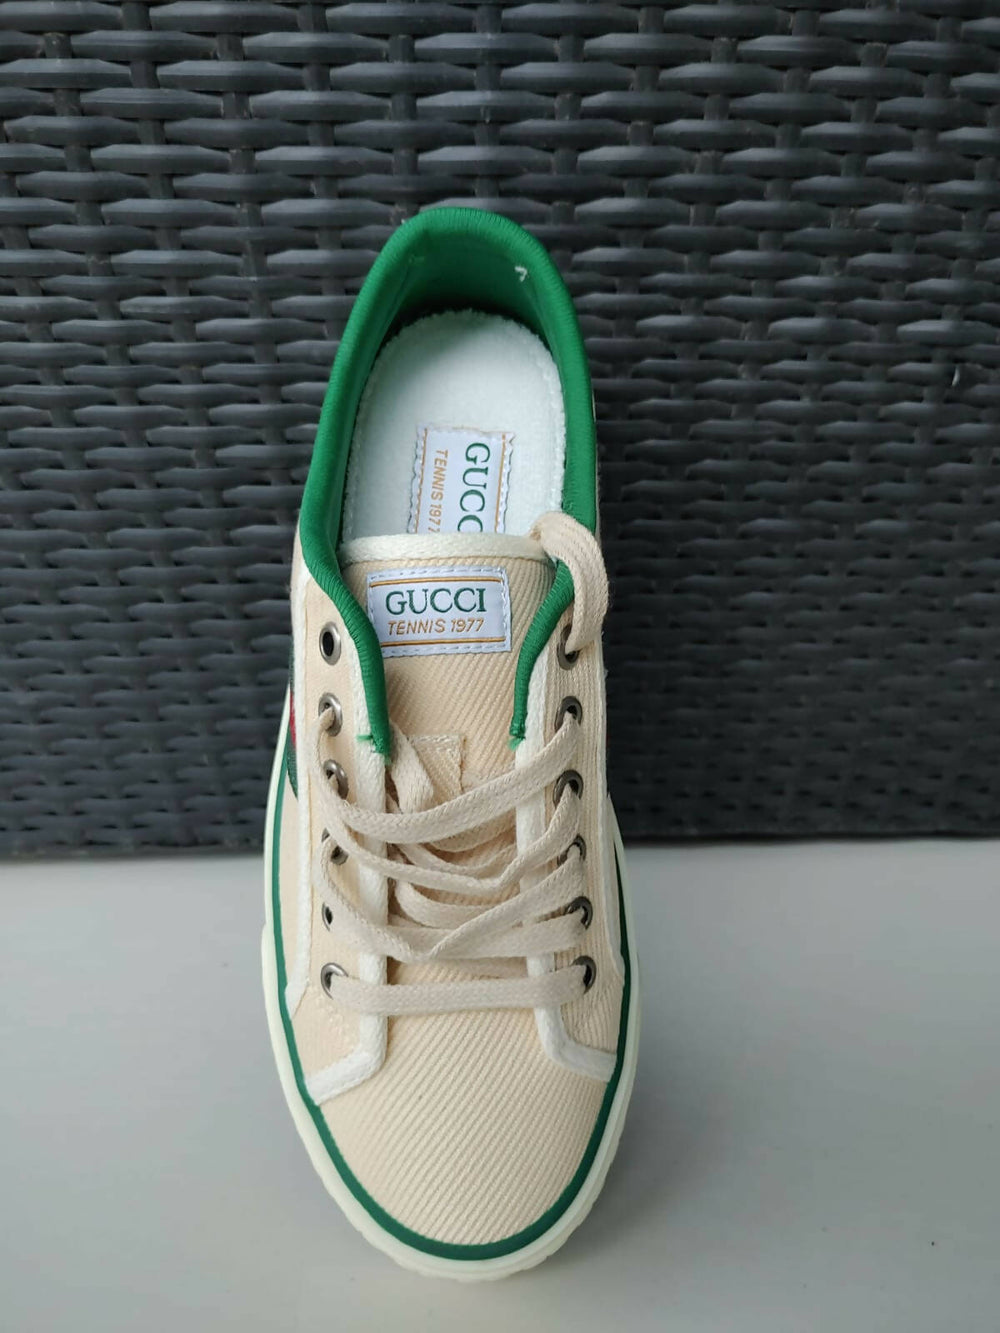 Image of Gucci 1977 Tennis Shoes